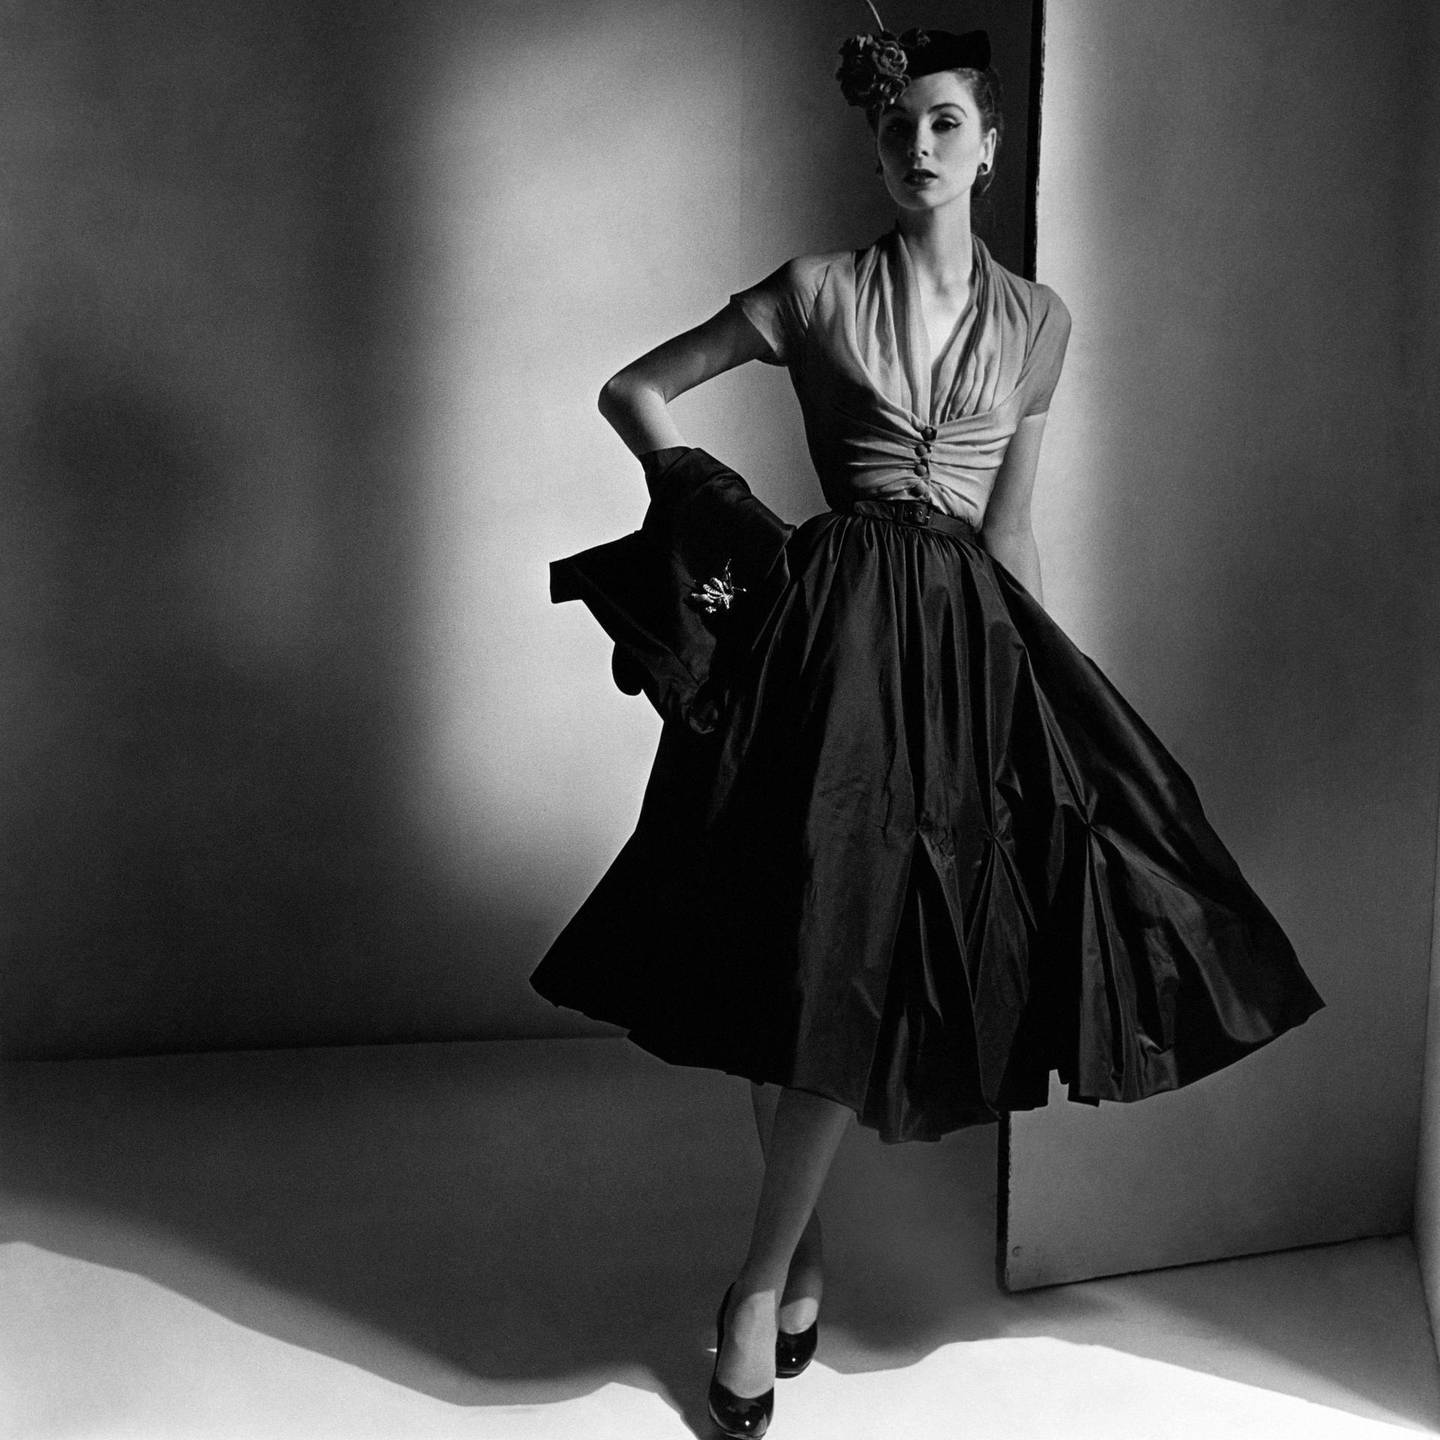 Model Suzy Parker wearing rose chiffon gathered bodice and black tulip-pleat skirt, with pillbox and wrap jacket, by Dior, with a Louis XIV pin. (Photo by Horst P. Horst/Conde Nast via Getty Images)